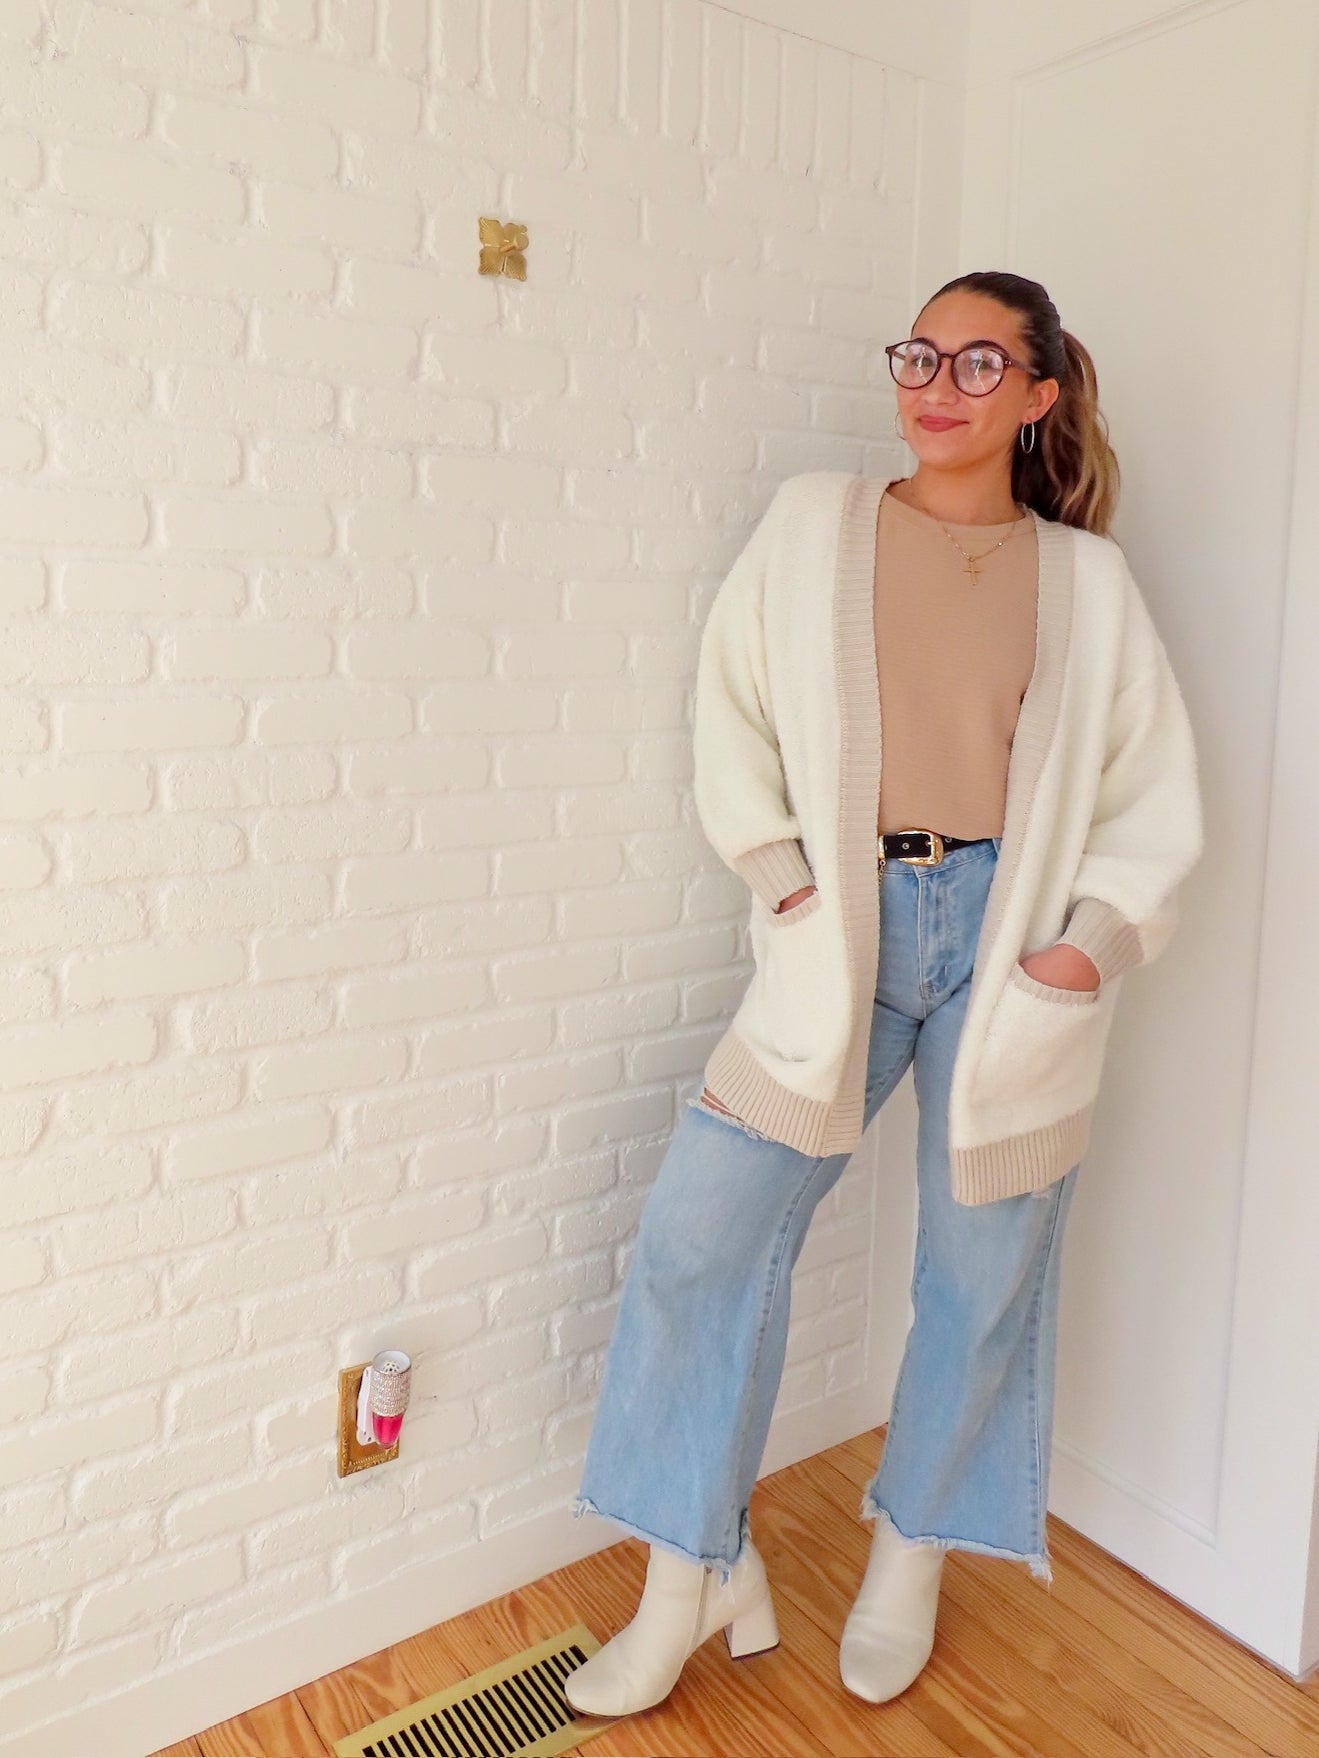 Paige Open Front Plush Sweater Cardigan